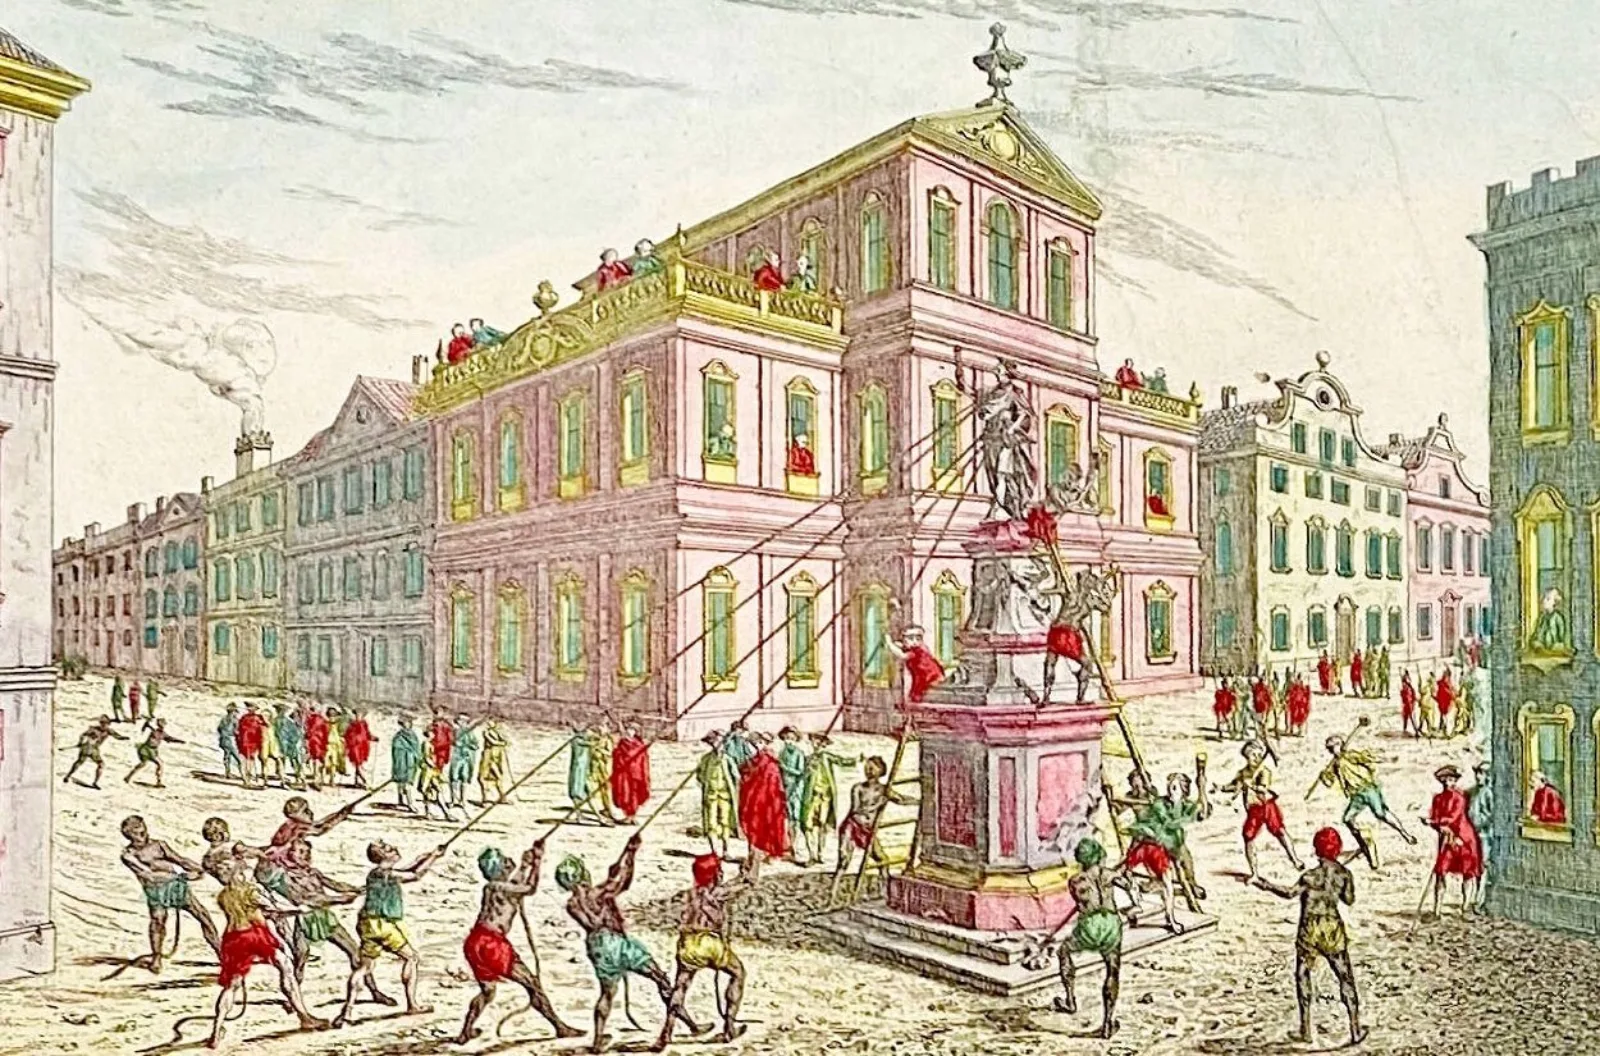 Colonists topple a statue of King George III in New York City